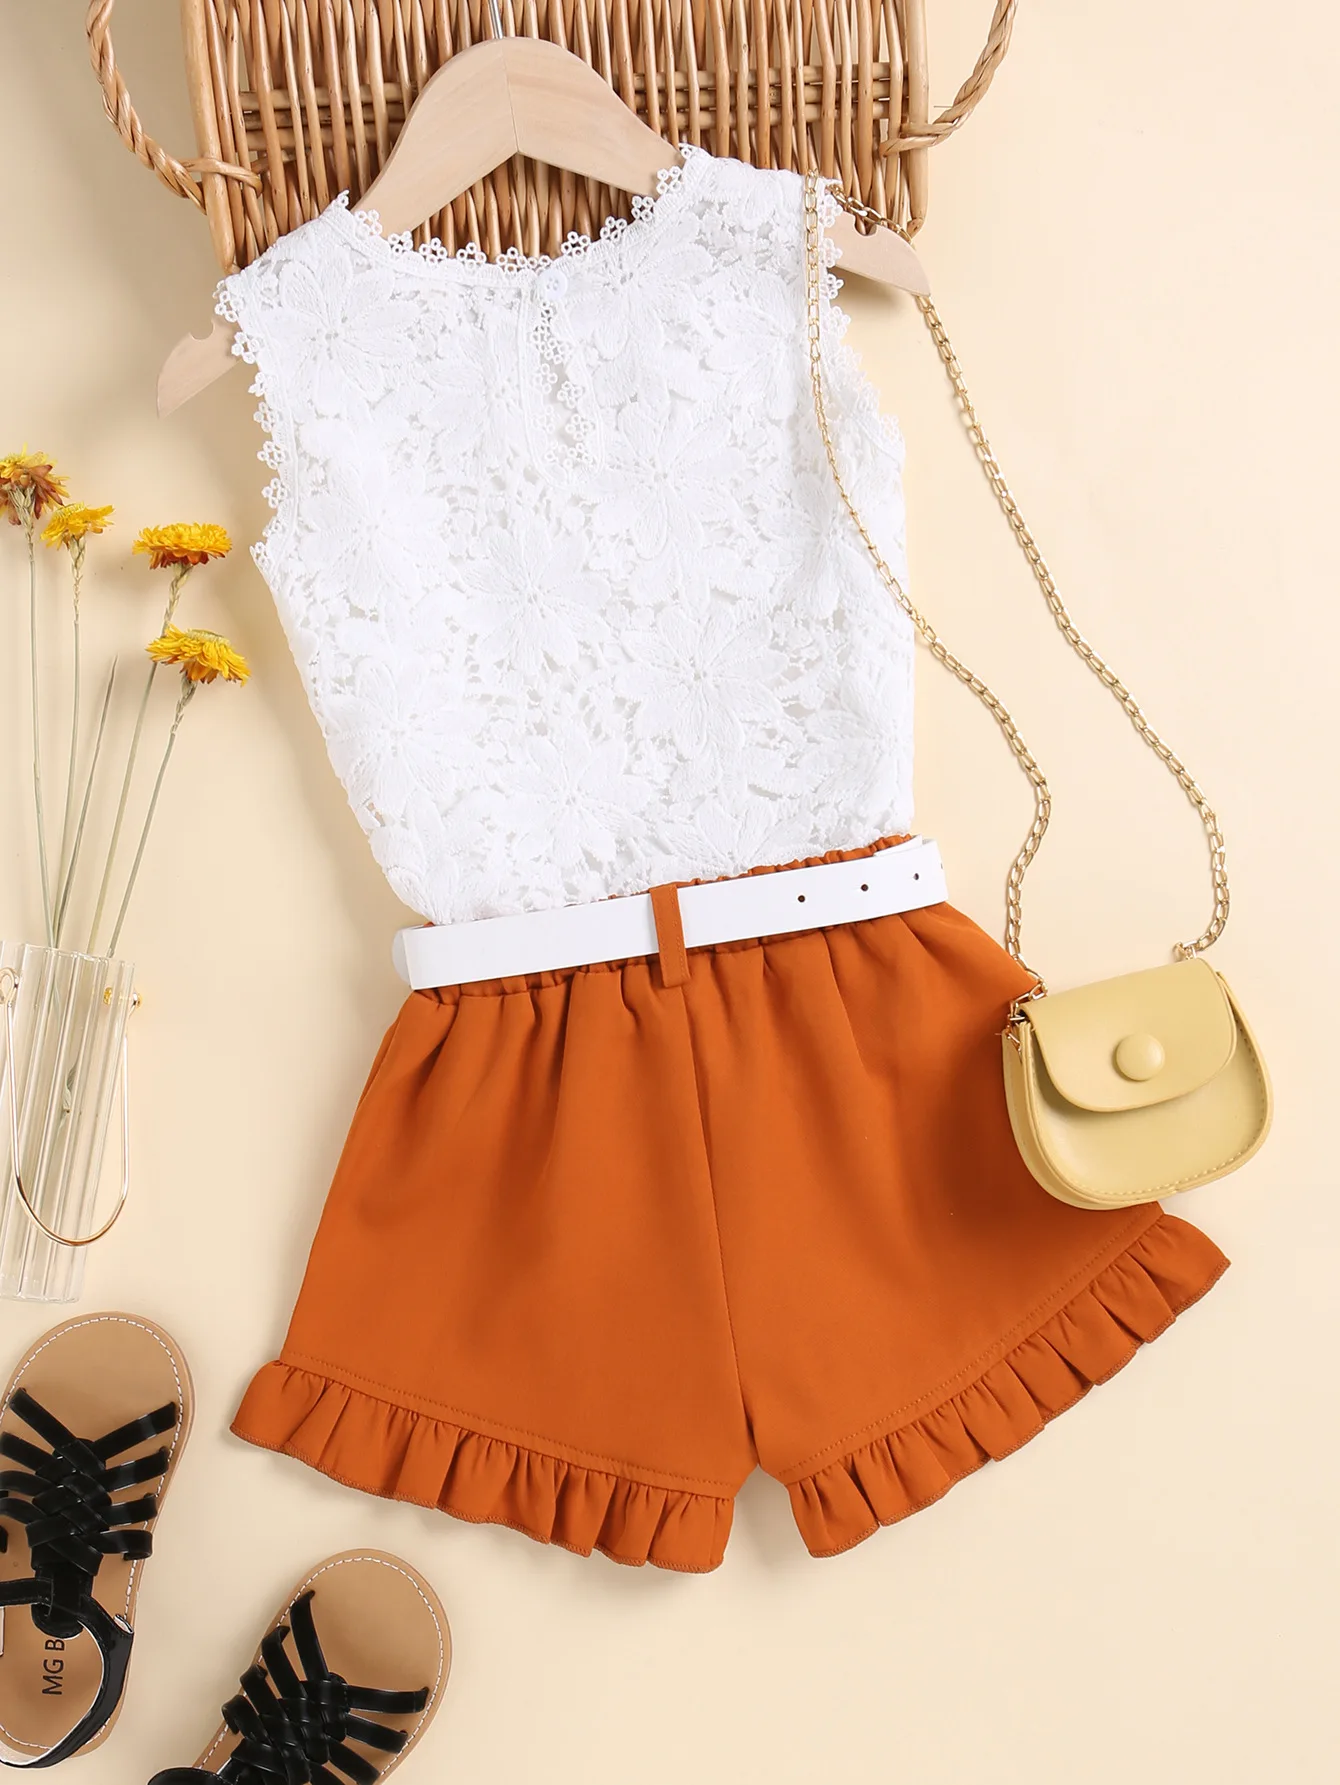 Korean fashion children two piece summer outfits sleeveless shirts+shorts+belt 3pcs kids outfits 1-7 years